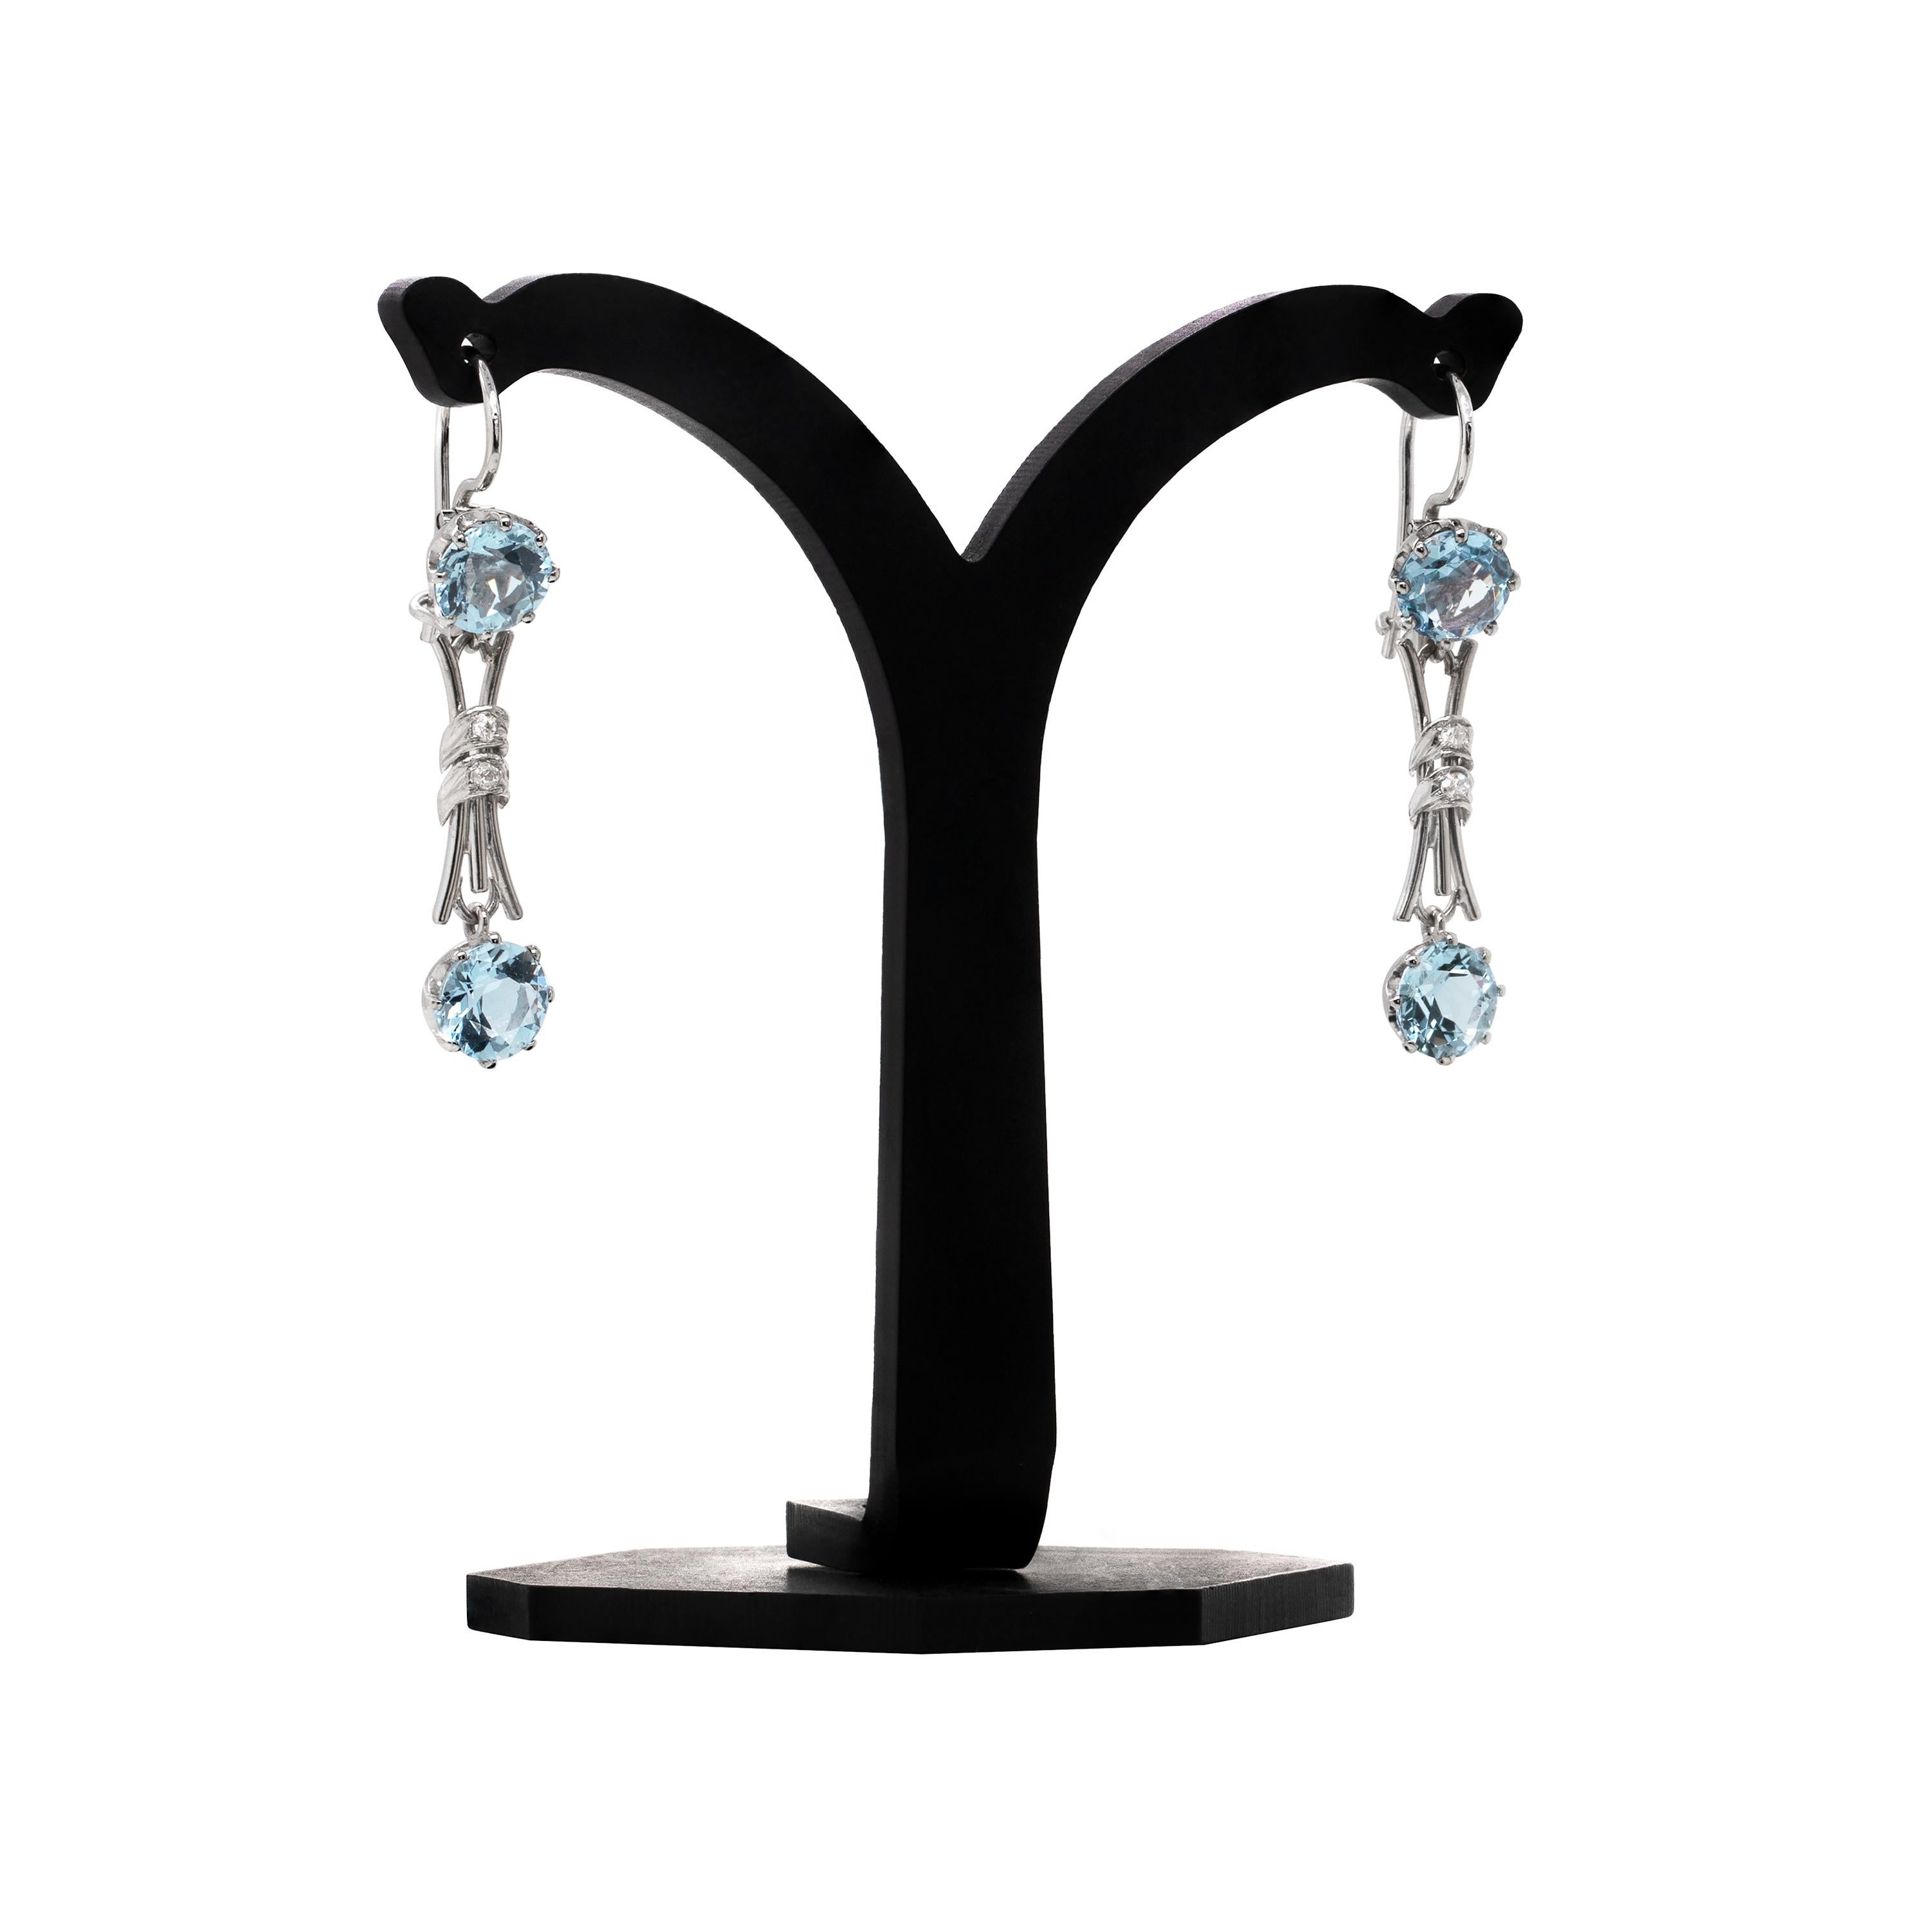 These delicate drop earrings feature two beautiful round shaped aquamarines in each, with a total approximate weight of 2.40ct, mounted in eight claw open back settings. The two aquamarines are connected by fine white gold curved bars tight in the